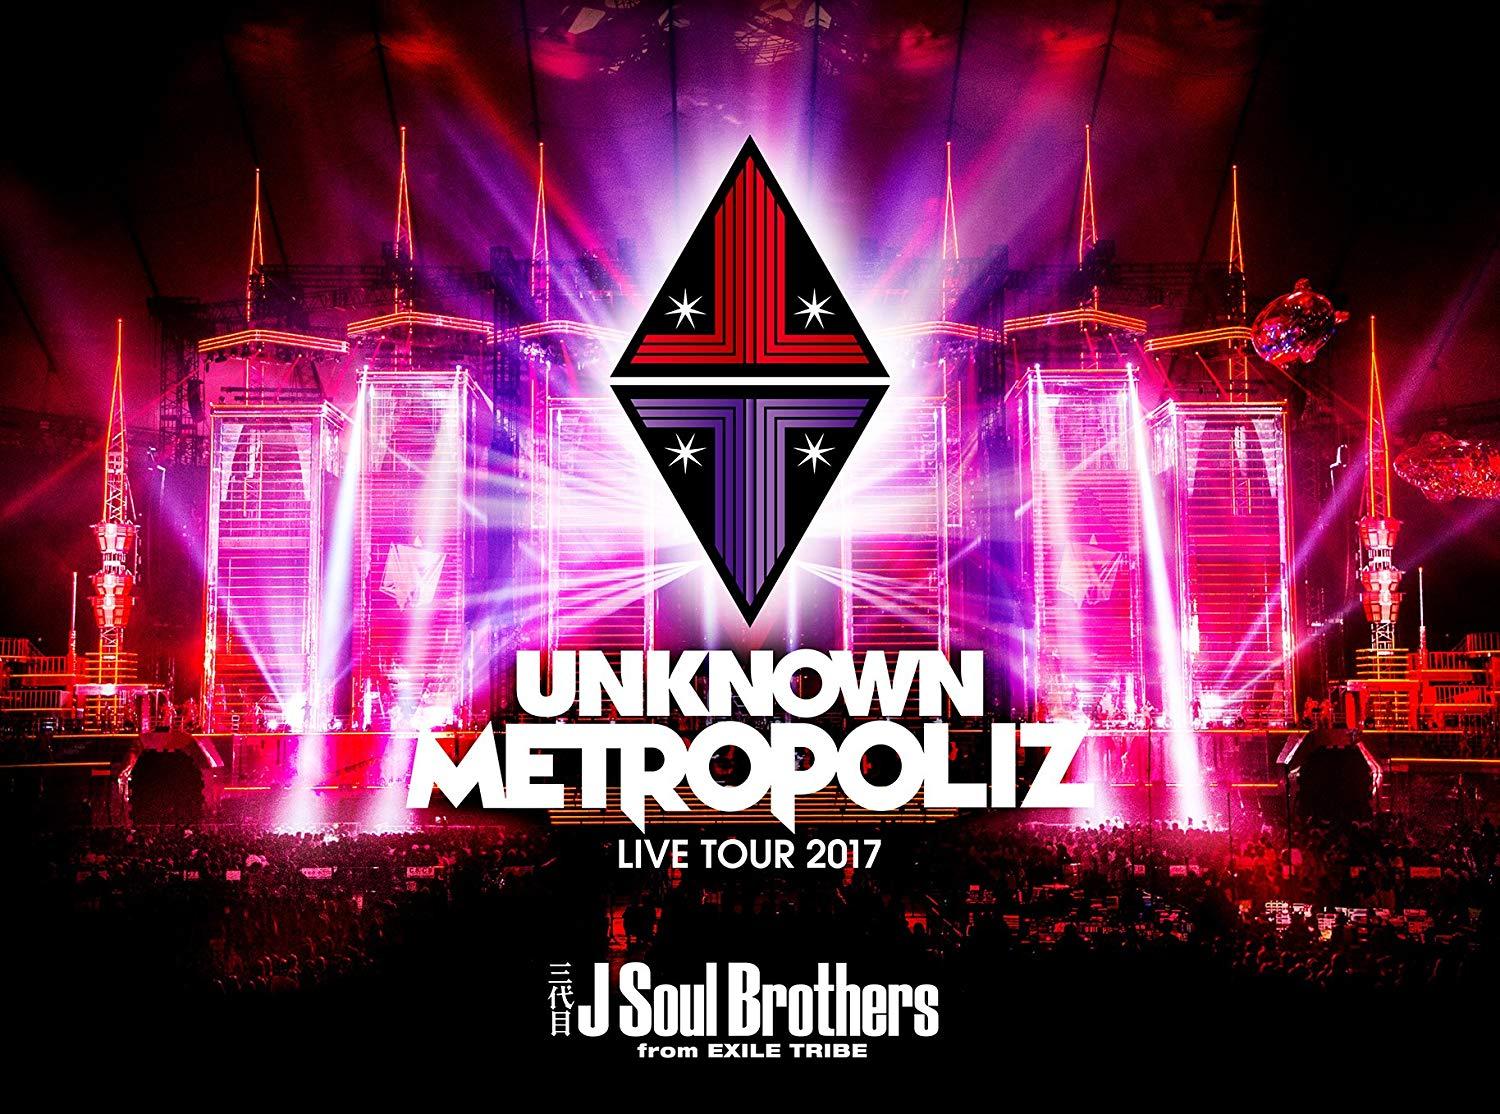 O J Soul Brothers LIVE TOUR 2017gUNKNOWN METROPOLIZ (񐶎Y) O J Soul Brothers from EXILE TRIBE rhythm zone